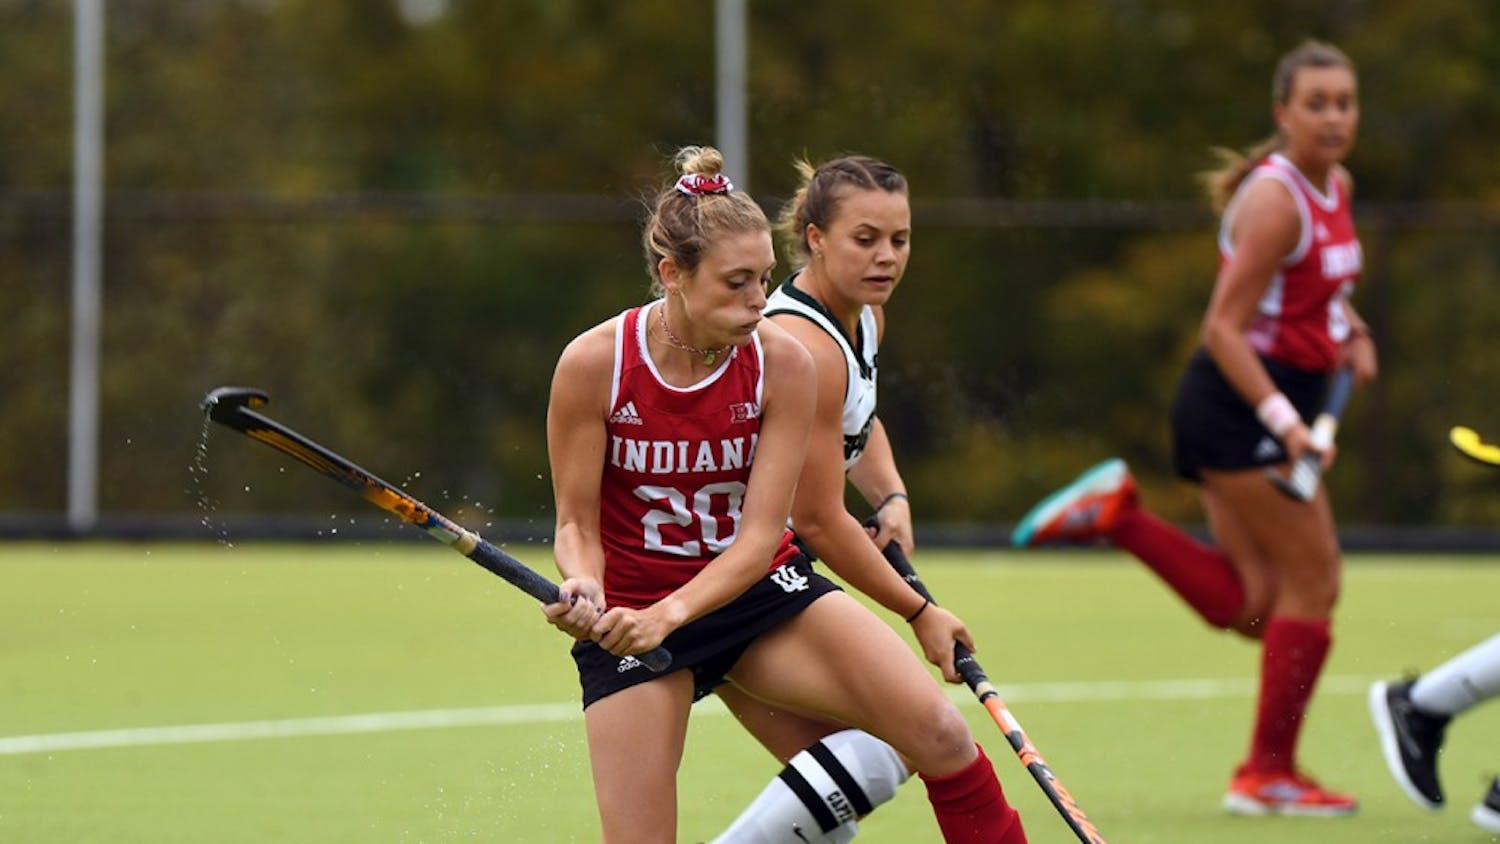 Senior forward Maddie Latino takes a shot against Michigan State on Oct. 15 at the IU Field Hockey Complex. Latino scored the final goal for IU this season in a loss to Ohio State.